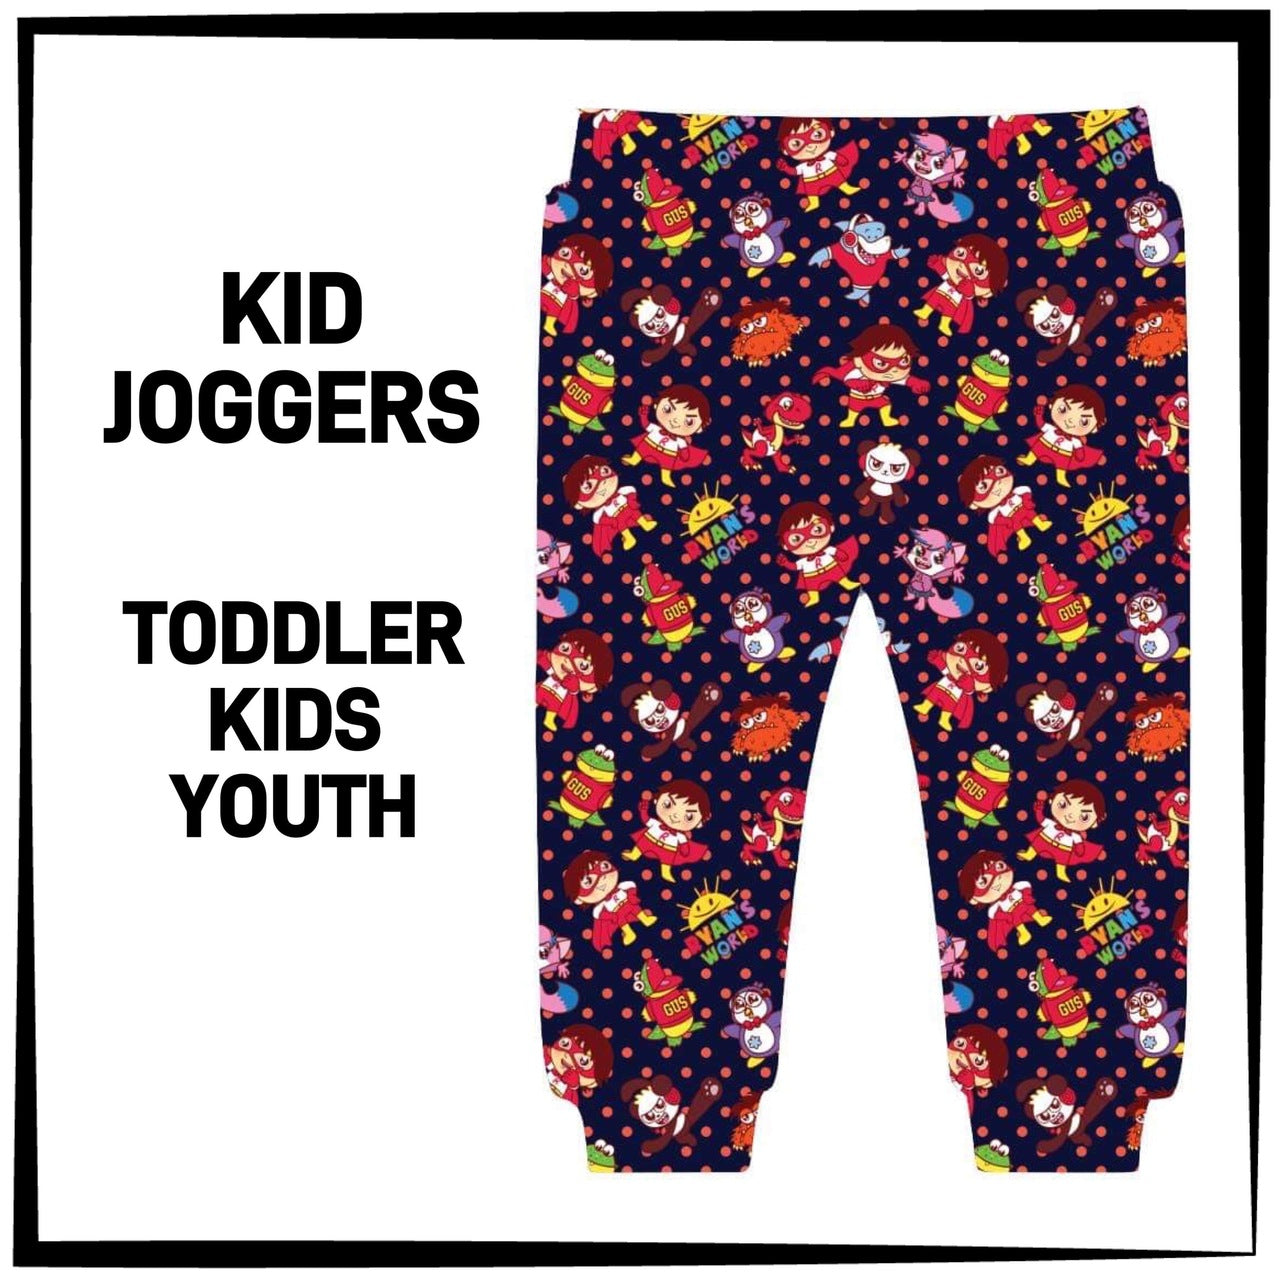 RTS - Toy Reviews Joggers